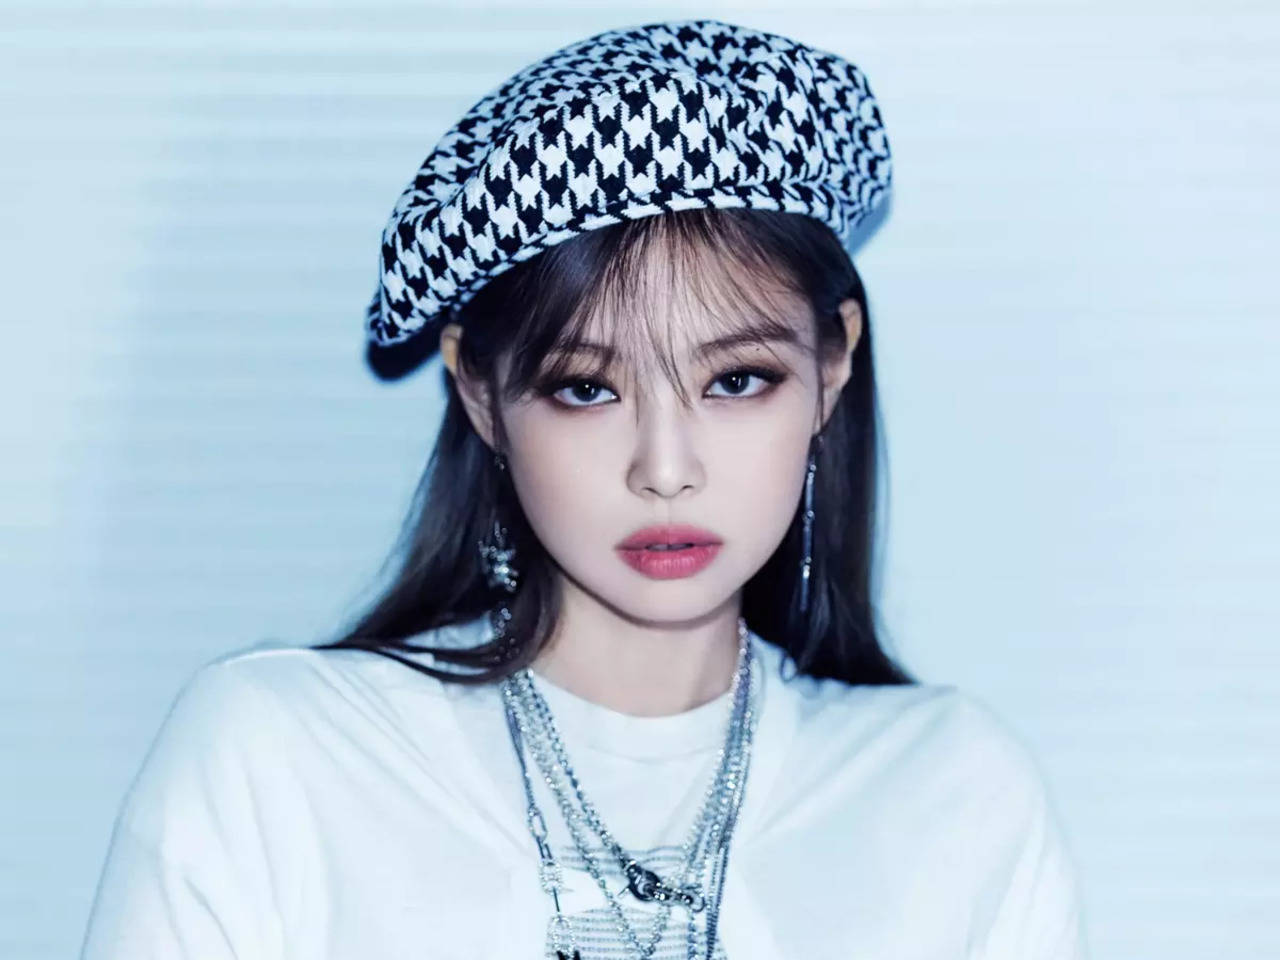 BLACKPINK's Jennie to feature in 'The Idol' co-starring The Weeknd,  Lily-Rose Depp: Report | K-pop Movie News - Times of India